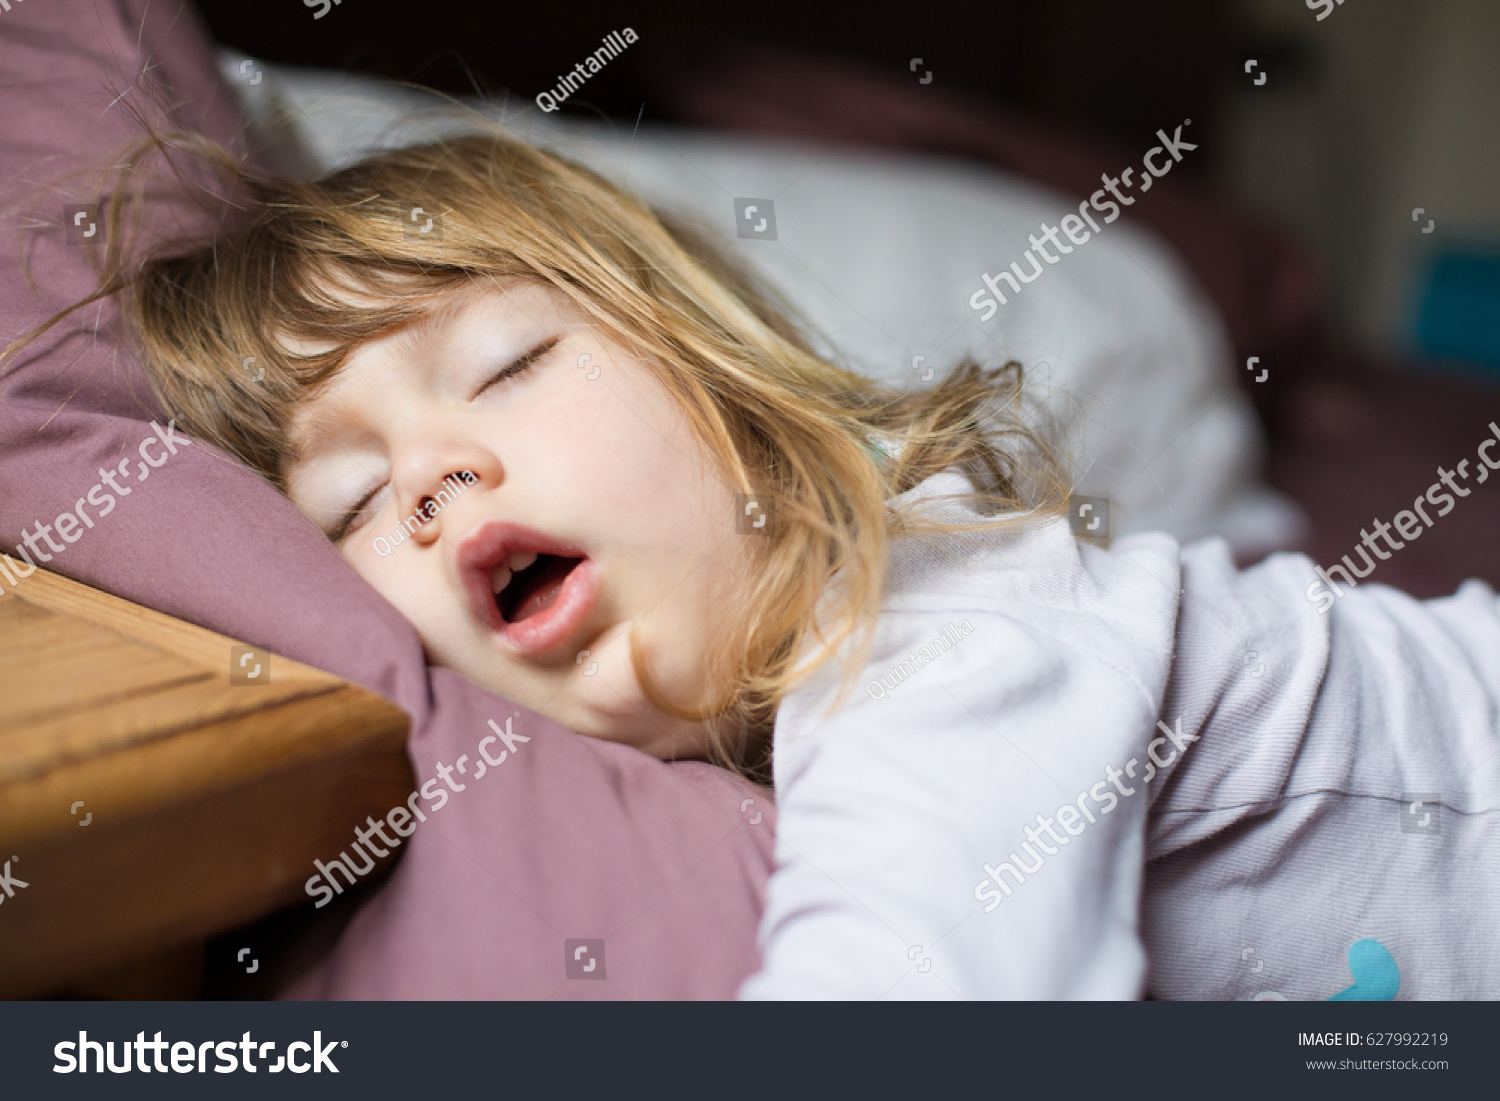 funny face expression with open mouth of blonde caucasian three years old child,  sleeping on  king bed #627992219